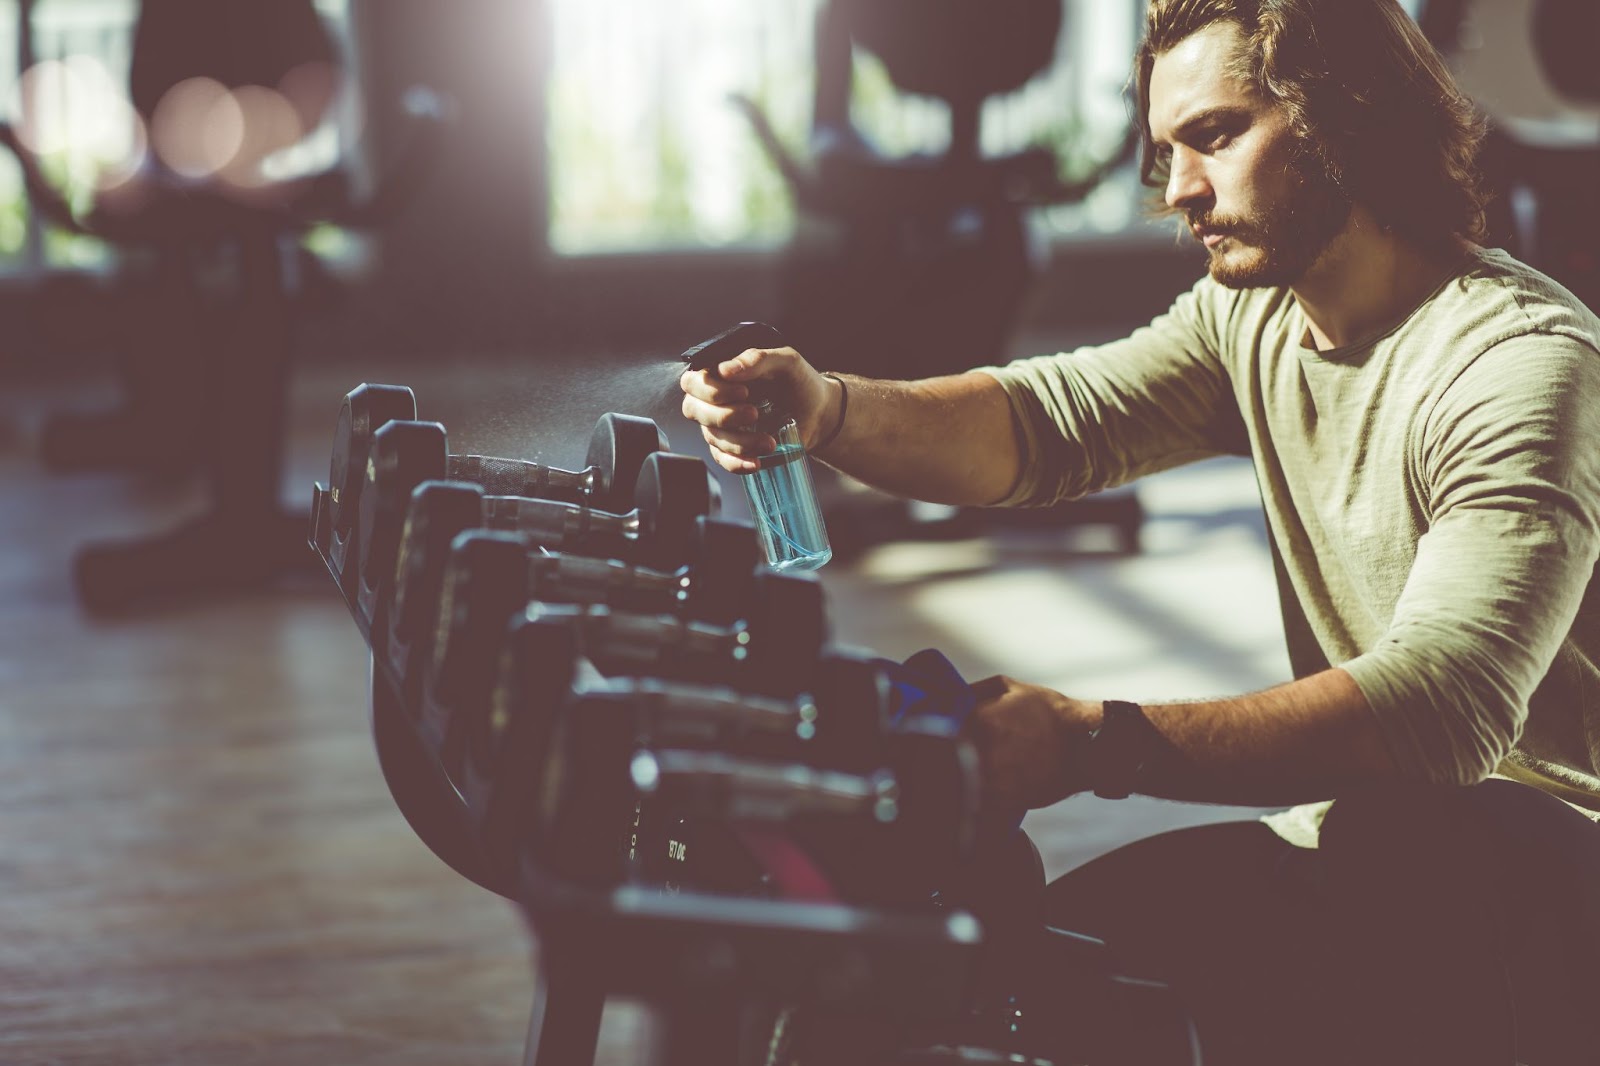 Young man spraying antibacterial solution on dumbbells in a fitness studio